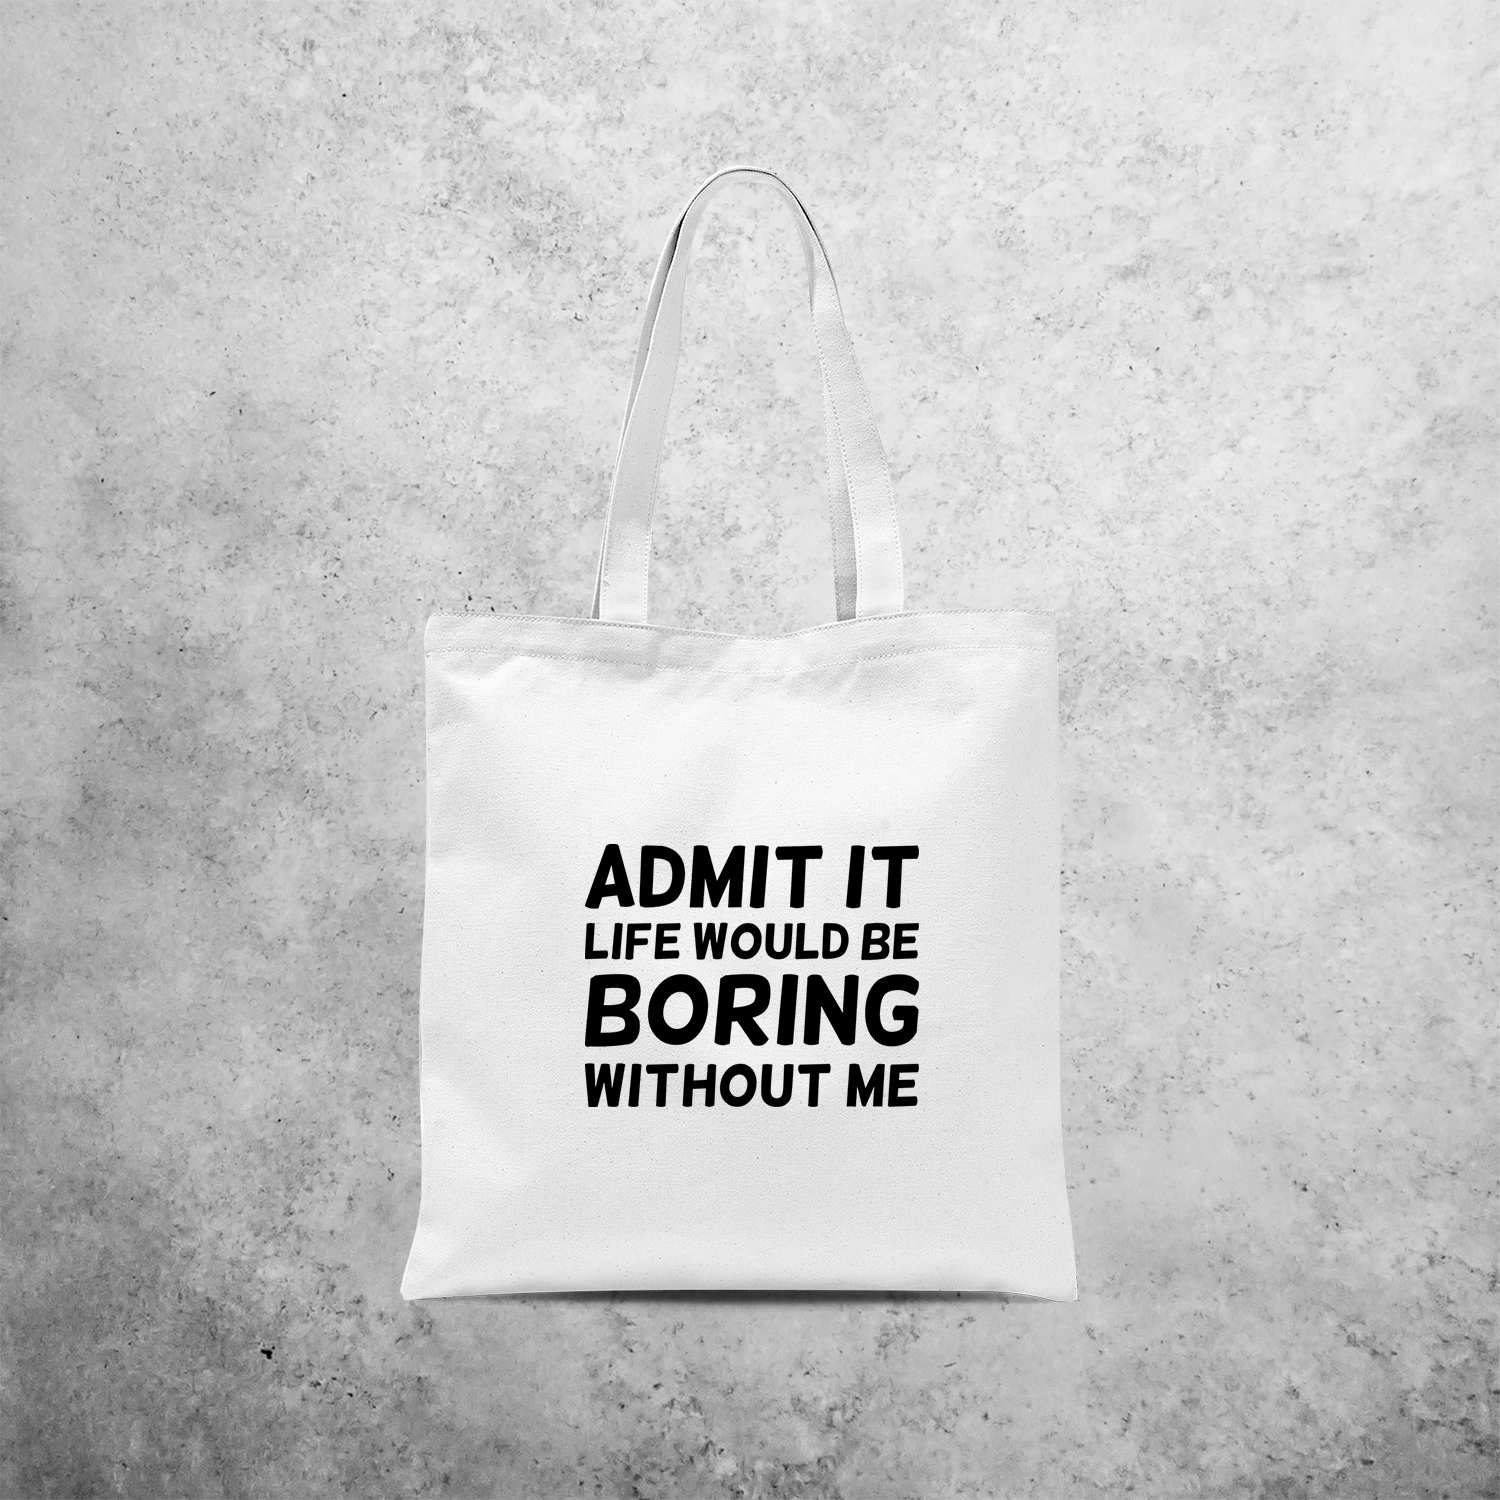 'Admit it, life would be boring without me' tote bag